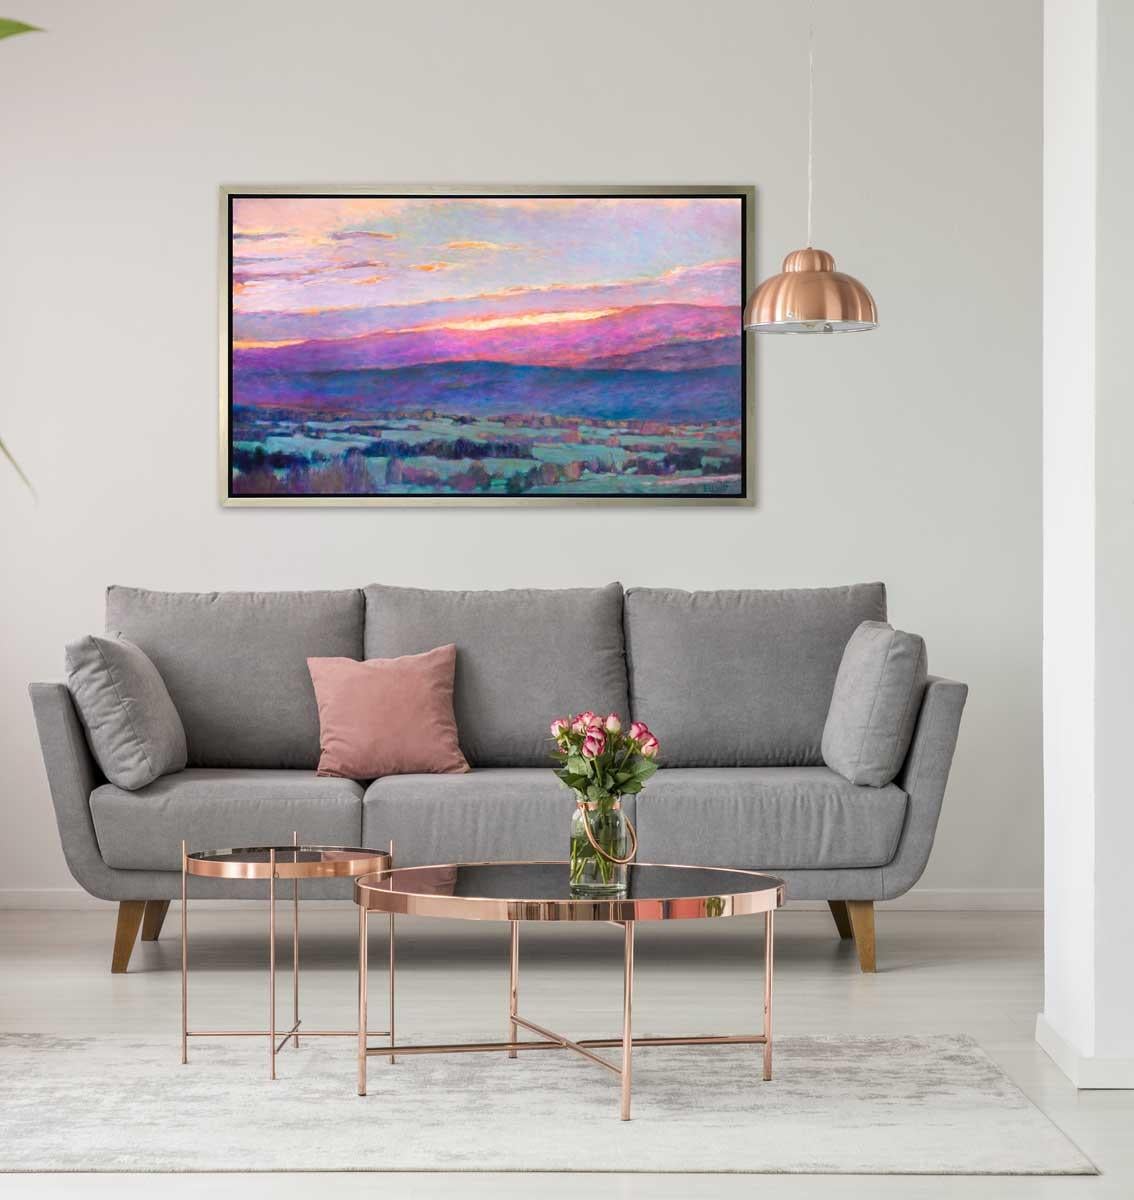 This colorful abstract landscape piece is a Limited-Edition giclee print by Ken Elliott with an edition of 195. Printed on canvas, this giclee ships framed in a gold floater frame wired and ready to hang. Other floater frame options are available in